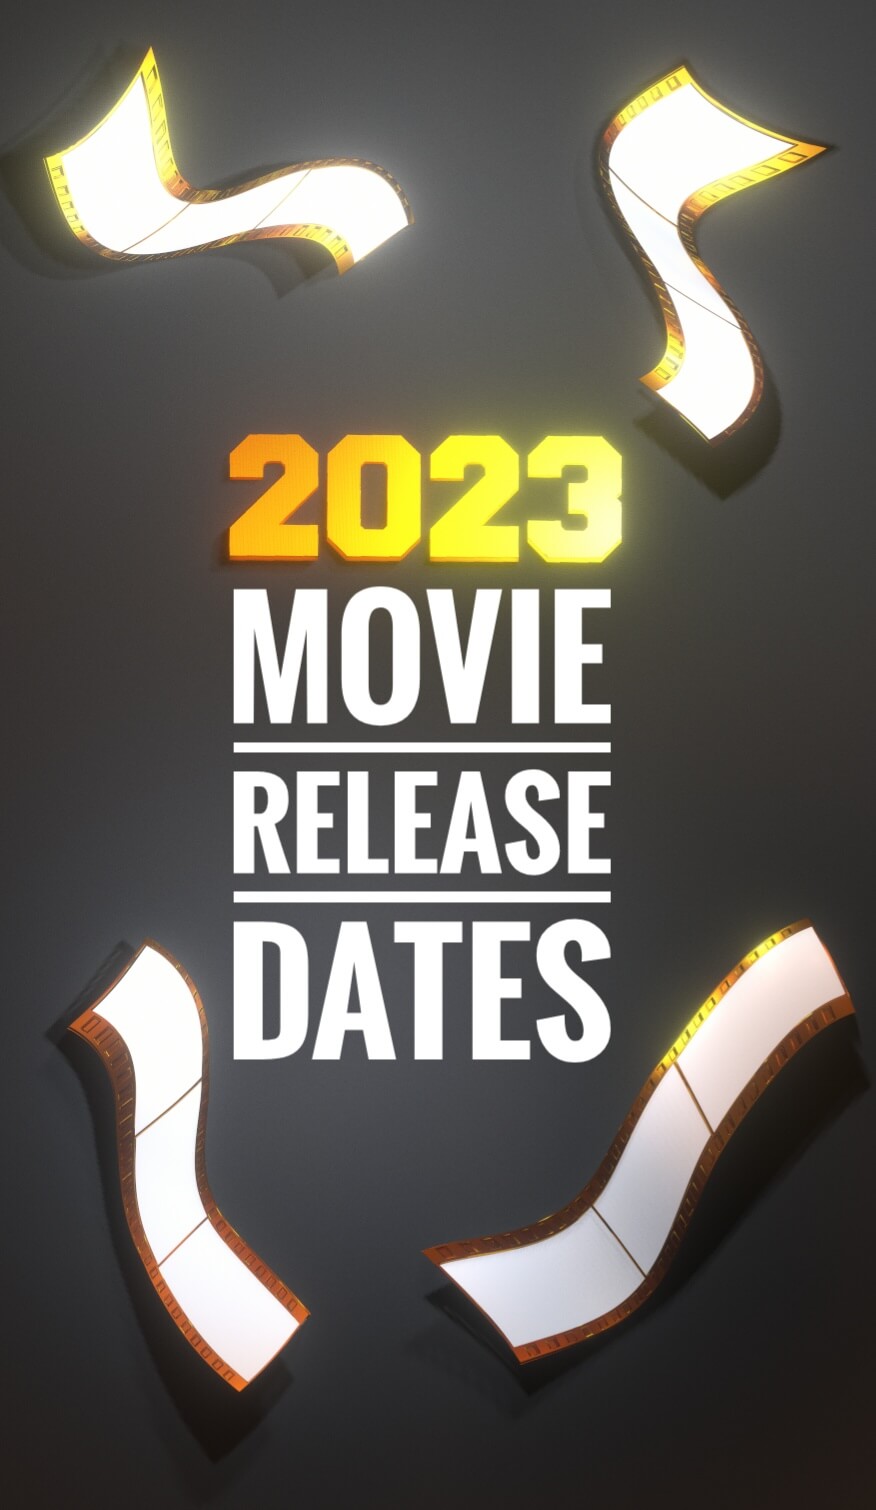 Text: 2023 movie release dates. Background: gold and white film reels falling on a dark grey background